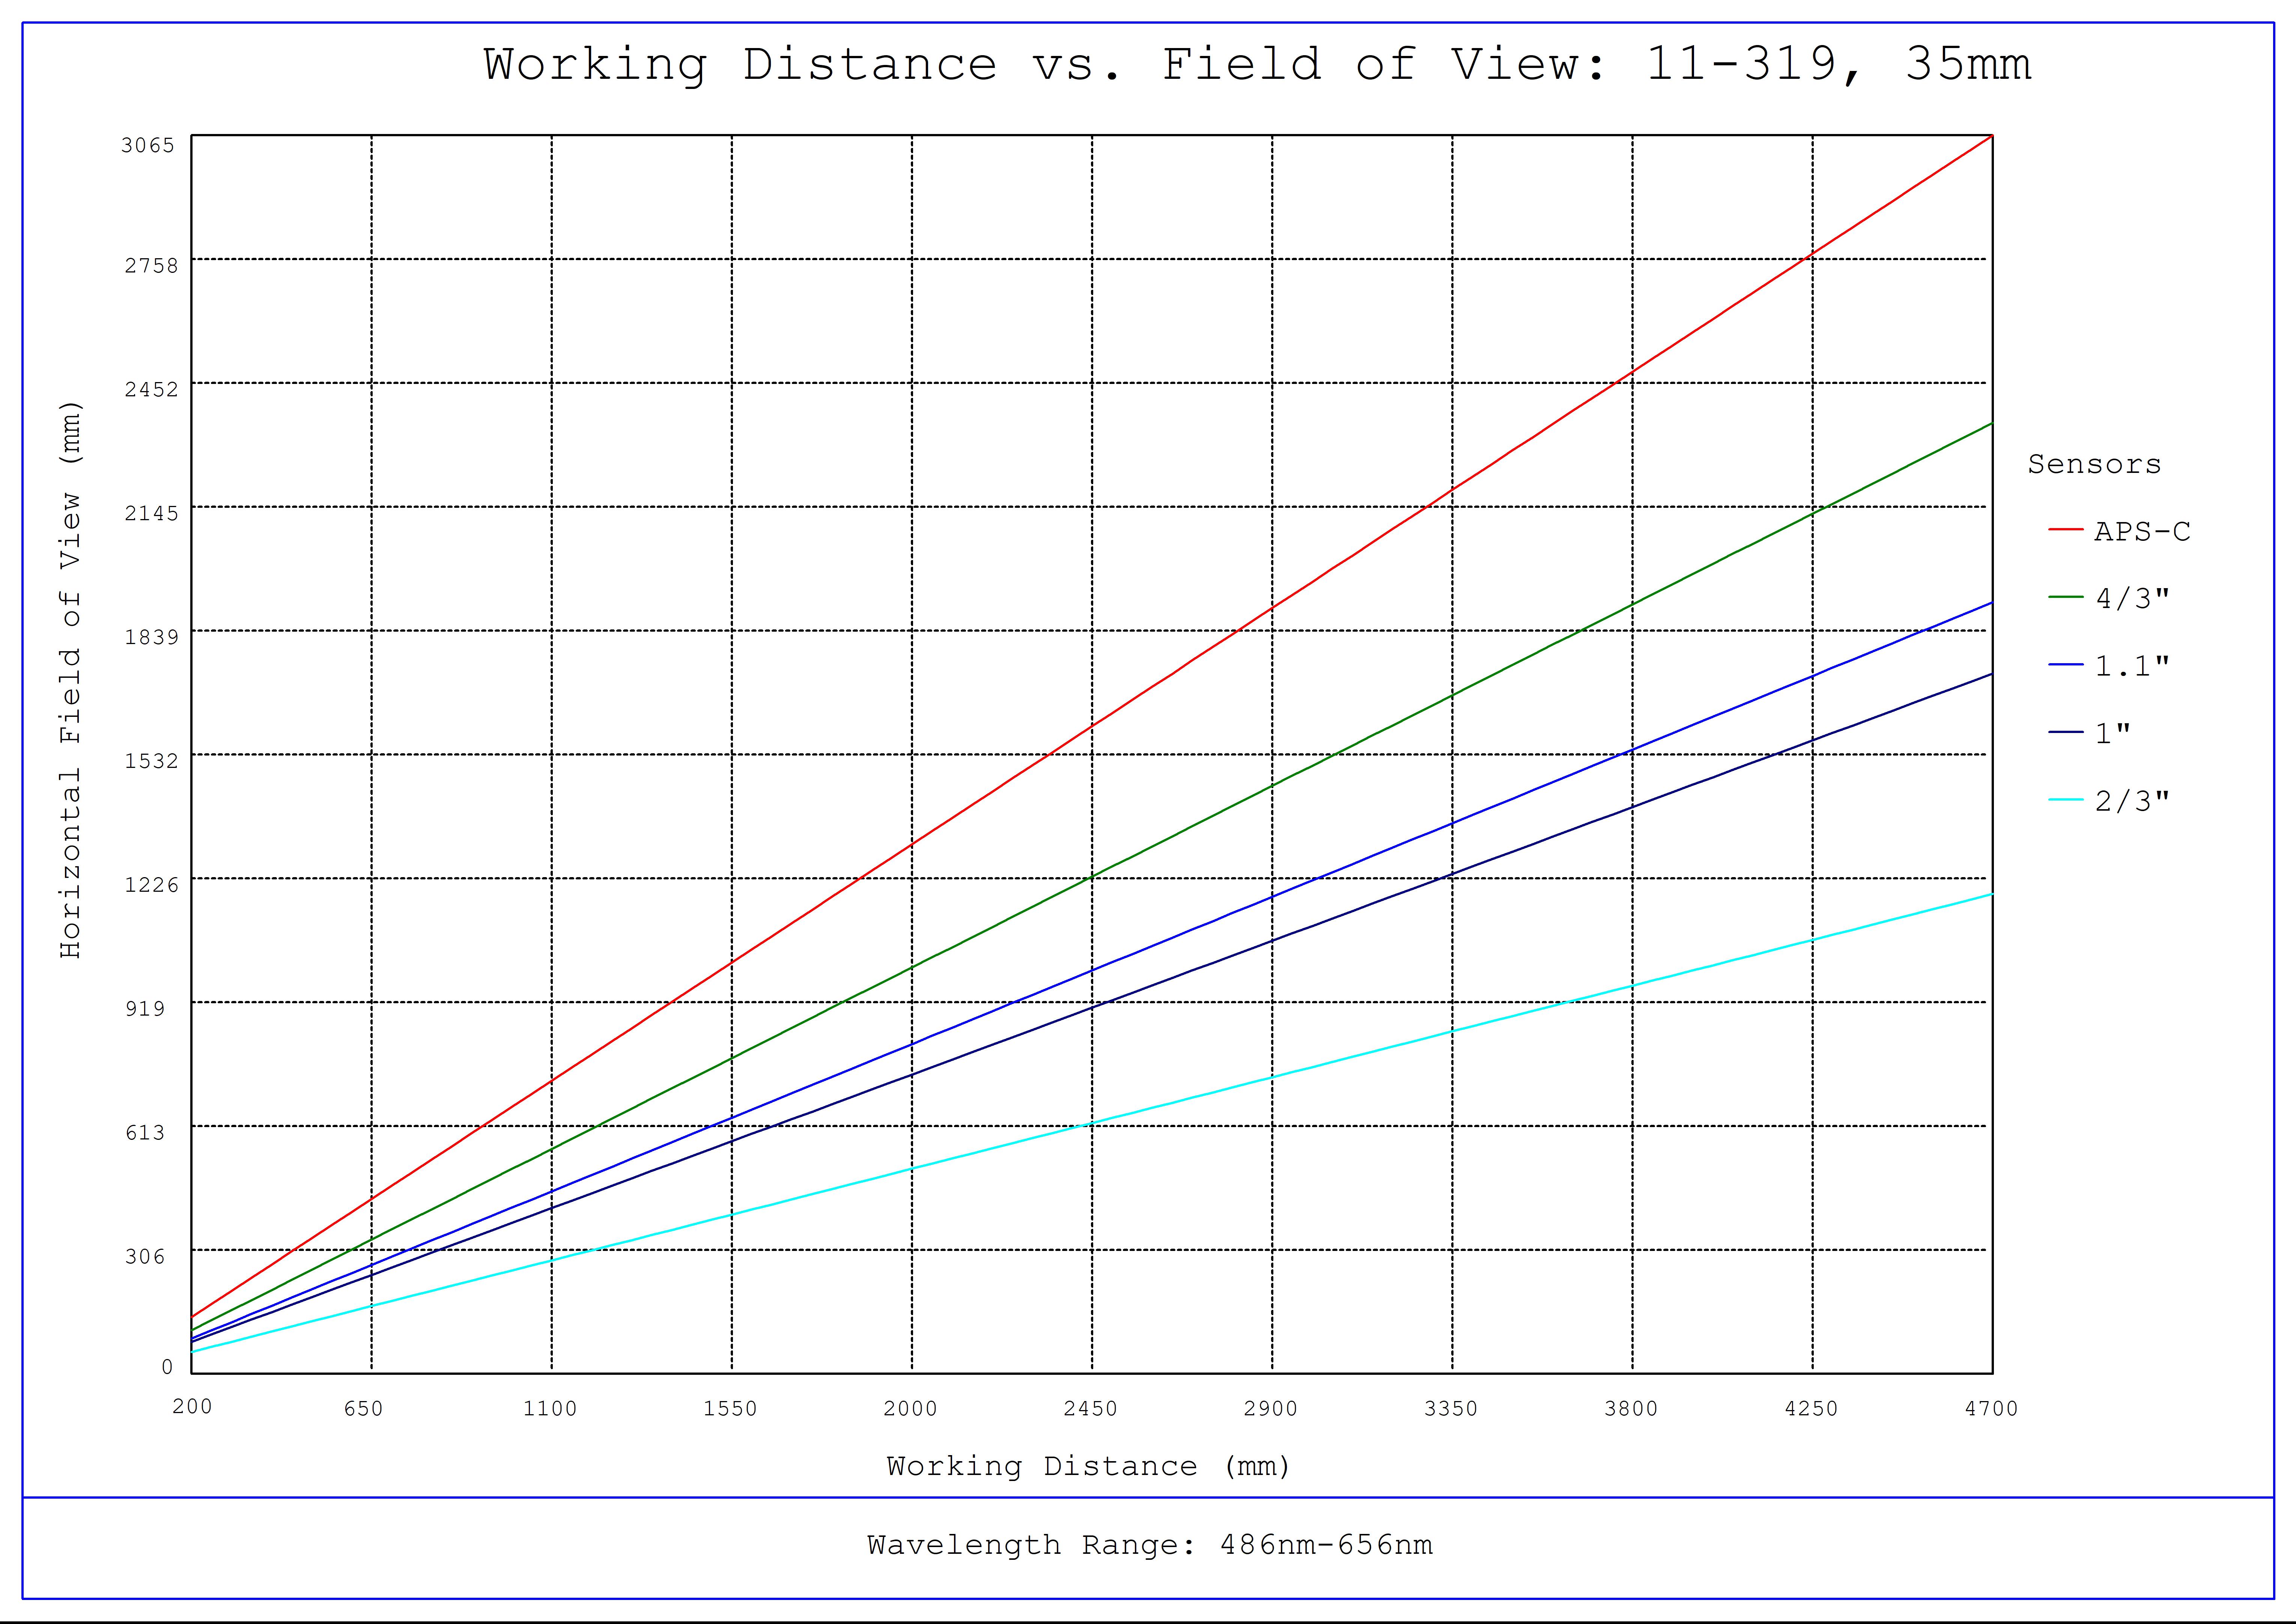 #11-319, 35mm CA Series Fixed Focal Length Lens, Working Distance versus Field of View Plot